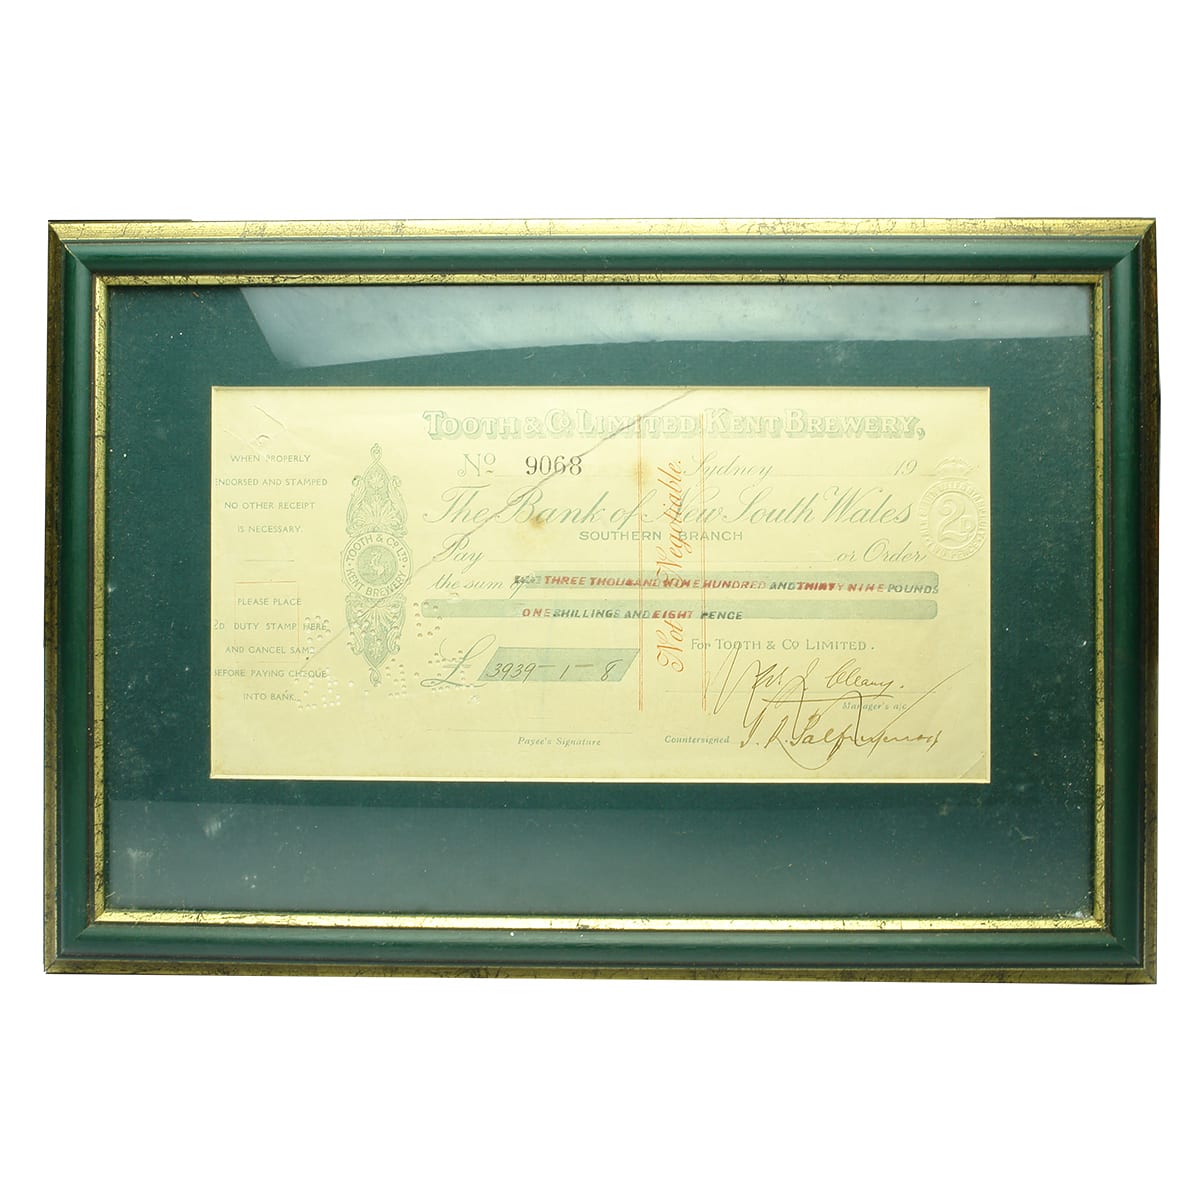 Receipt. Tooth & Co Limited Kent Brewery. Framed. Paid 20/9/1921. (Sydney, New South Wales)